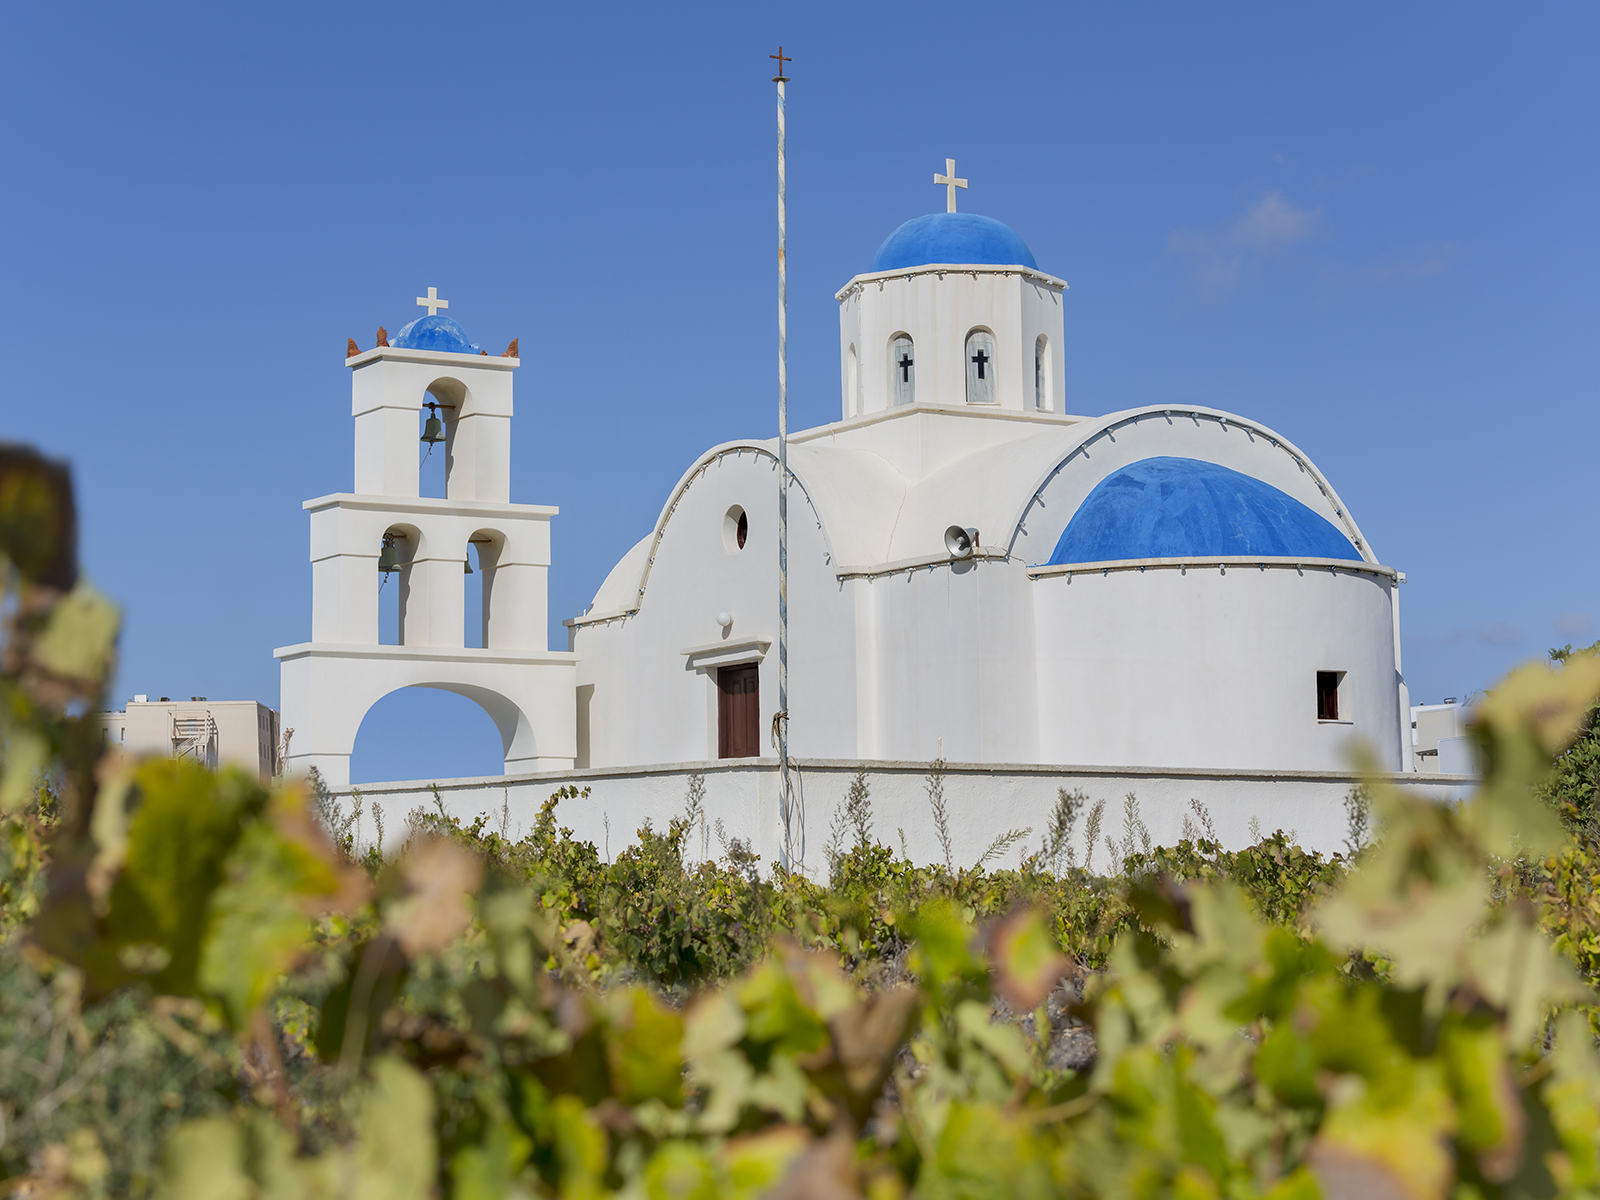 A white church surrounded by grapevines in Santorini